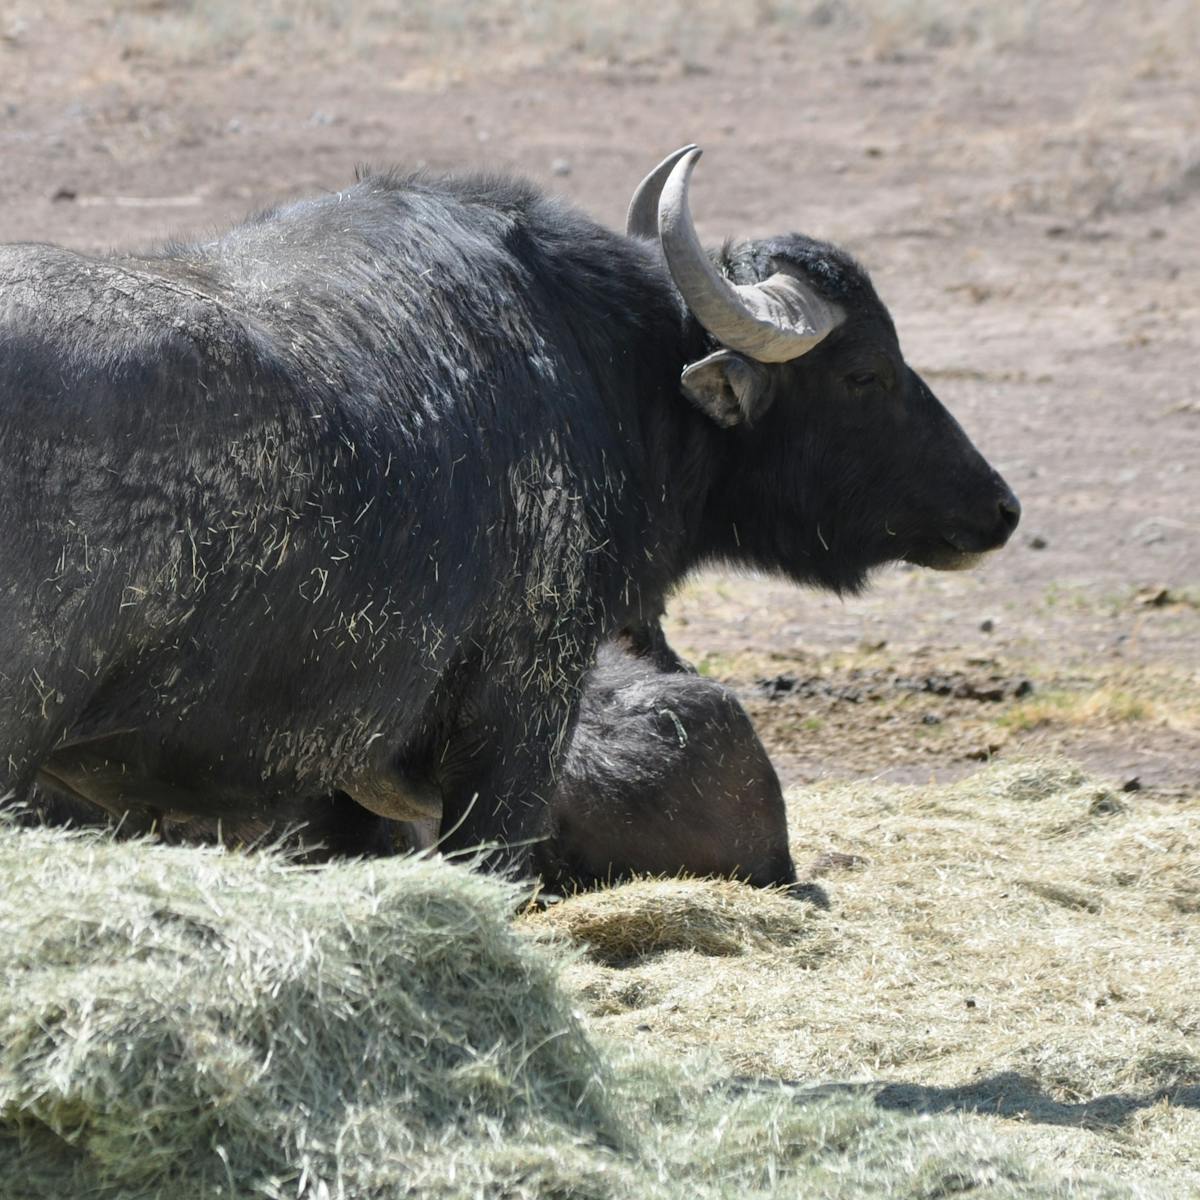 a Asian river water buffalo lying on top of a dry grass field